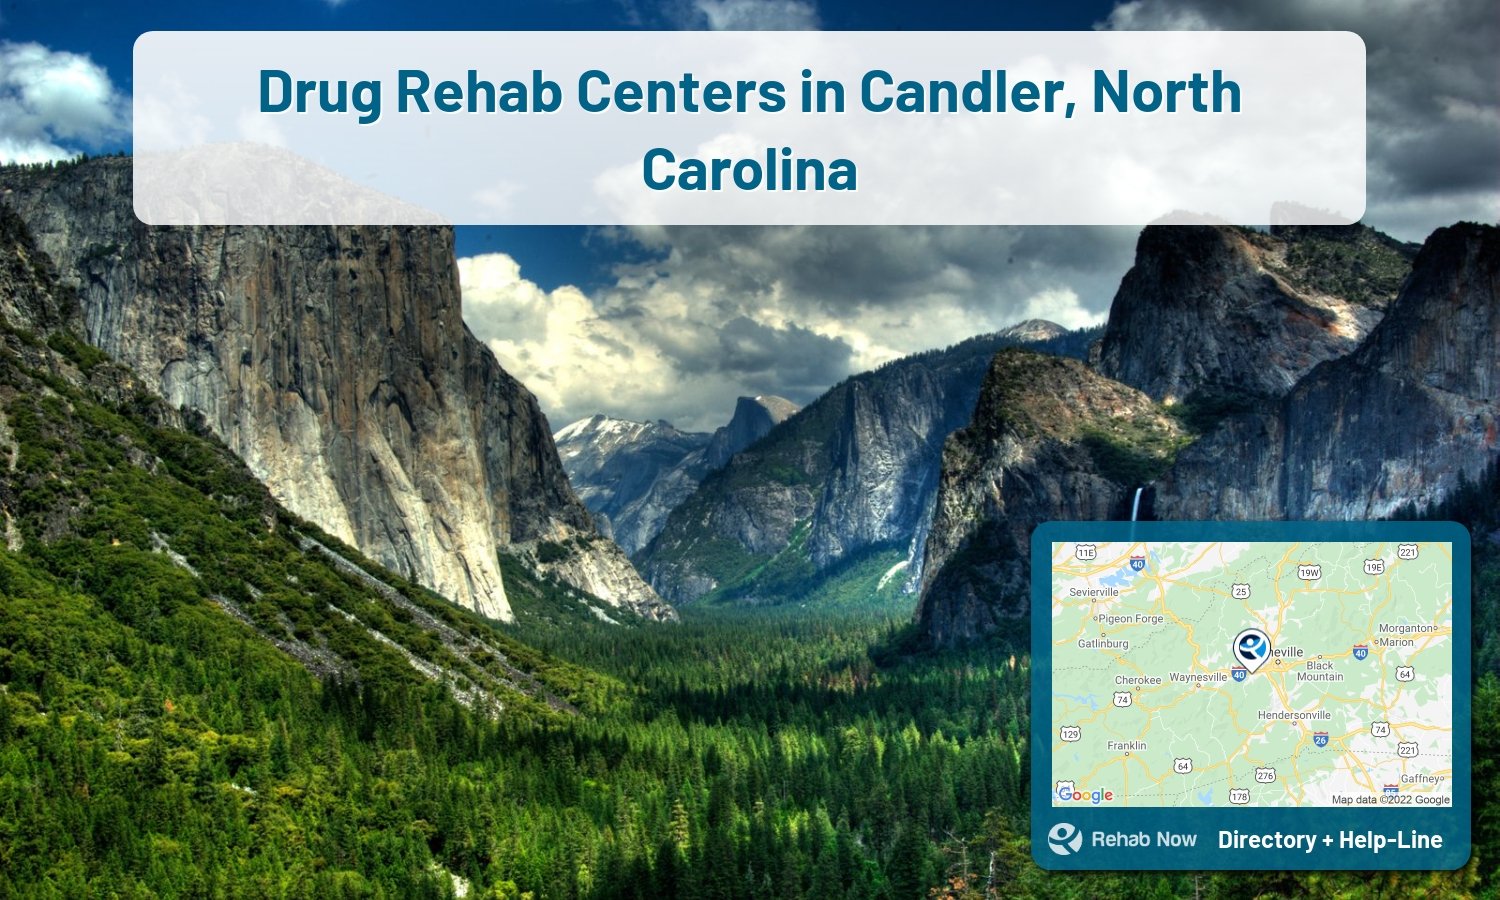 Candler, NC Treatment Centers. Find drug rehab in Candler, North Carolina, or detox and treatment programs. Get the right help now!